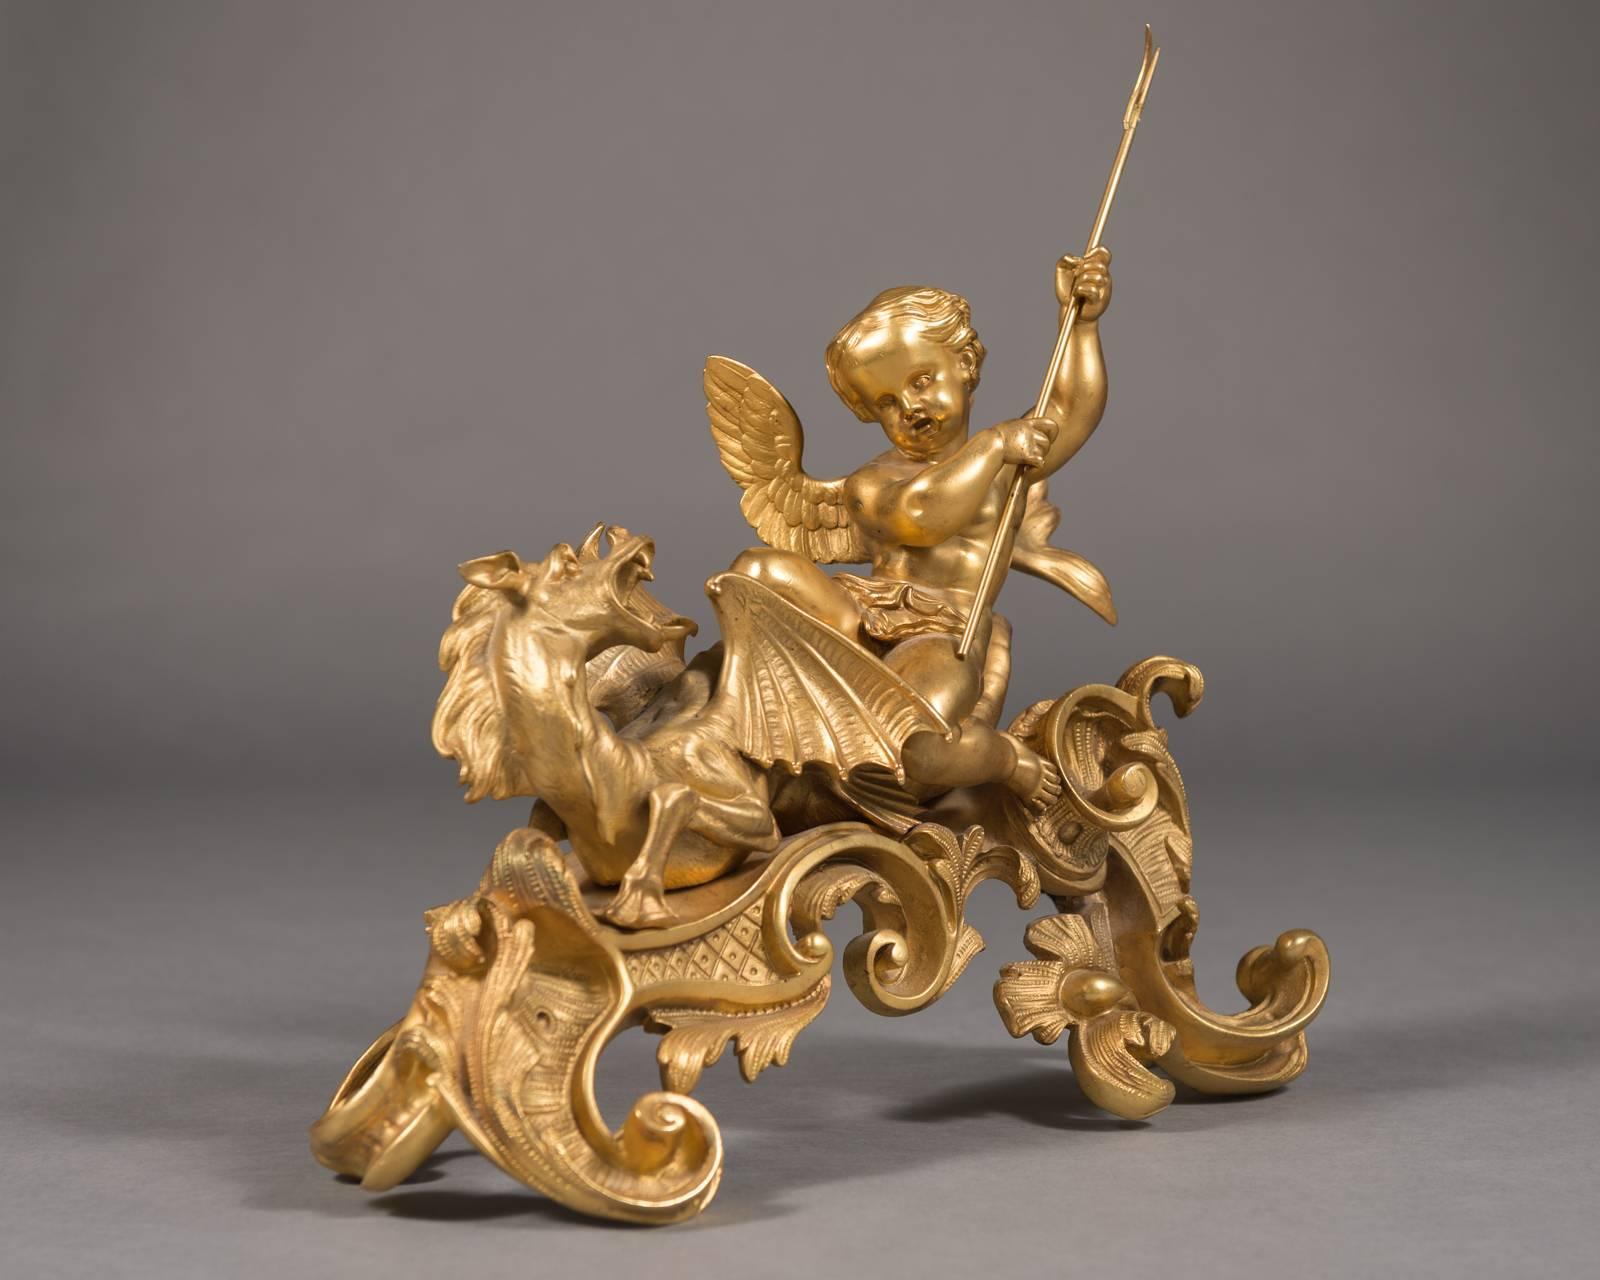 A fine pair 19th century French figural chenets depicting Cherubs & Dragons.

Having the original gilding, these fabulous chenets are breathtaking. 
Each with a winged cherub riding on top of a dragon. Both cherubs with tridents in their